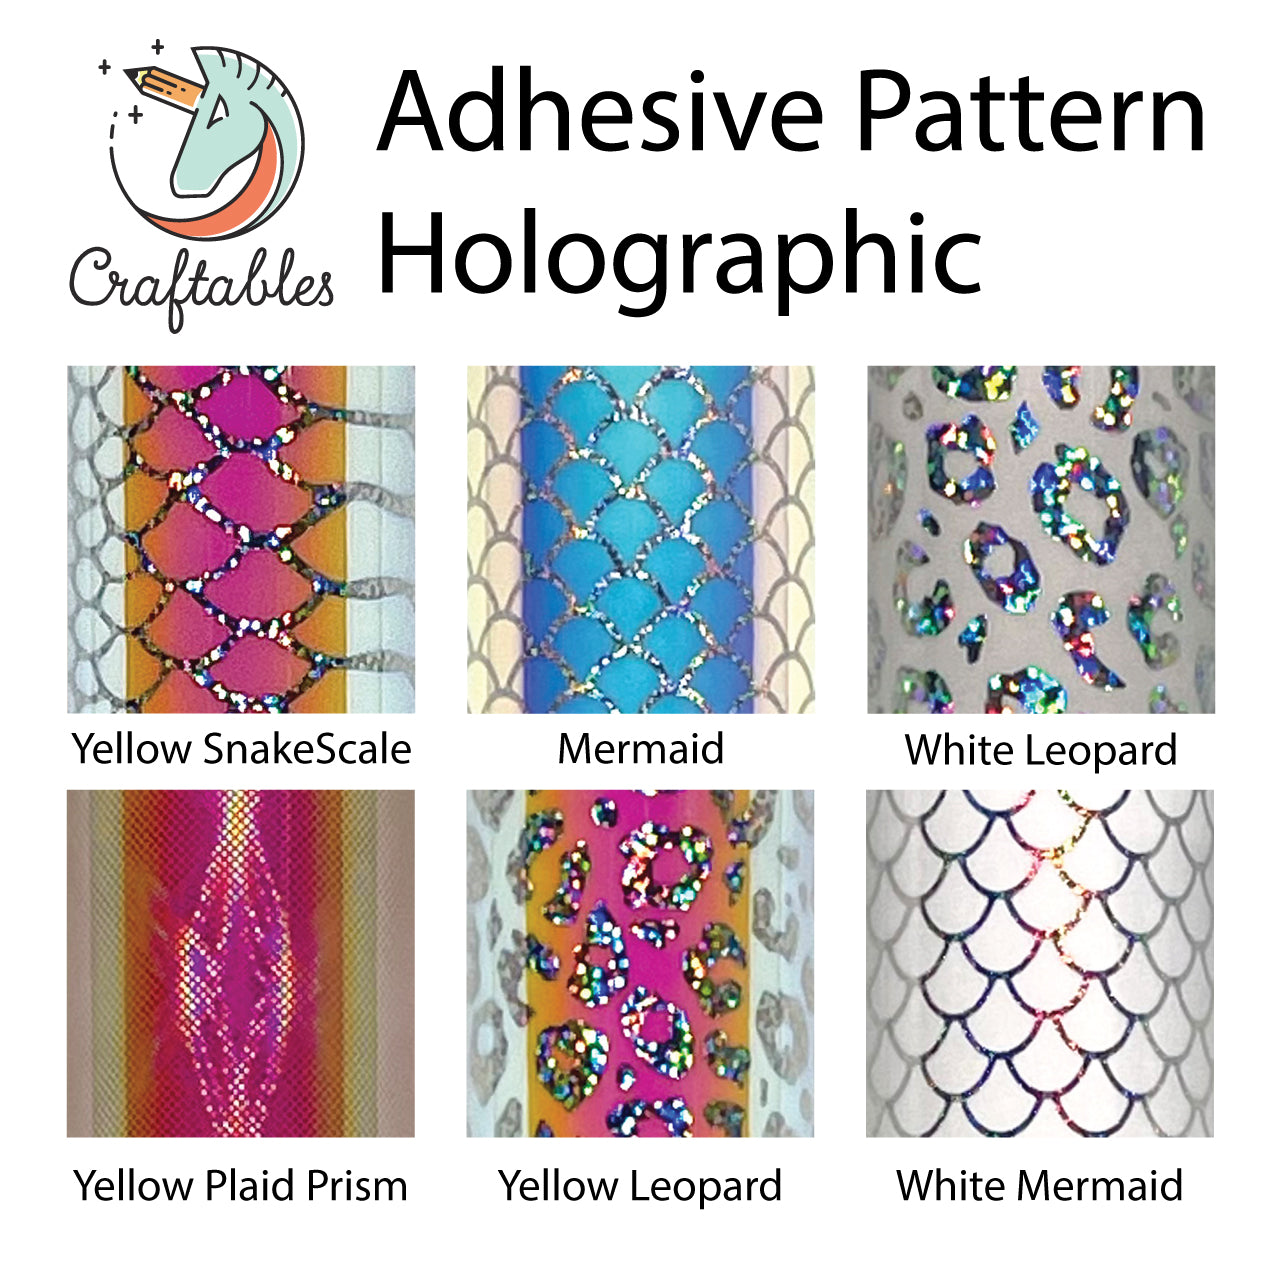 Mermaid Pattern Holographic Adhesive Vinyl Rolls By Craftables